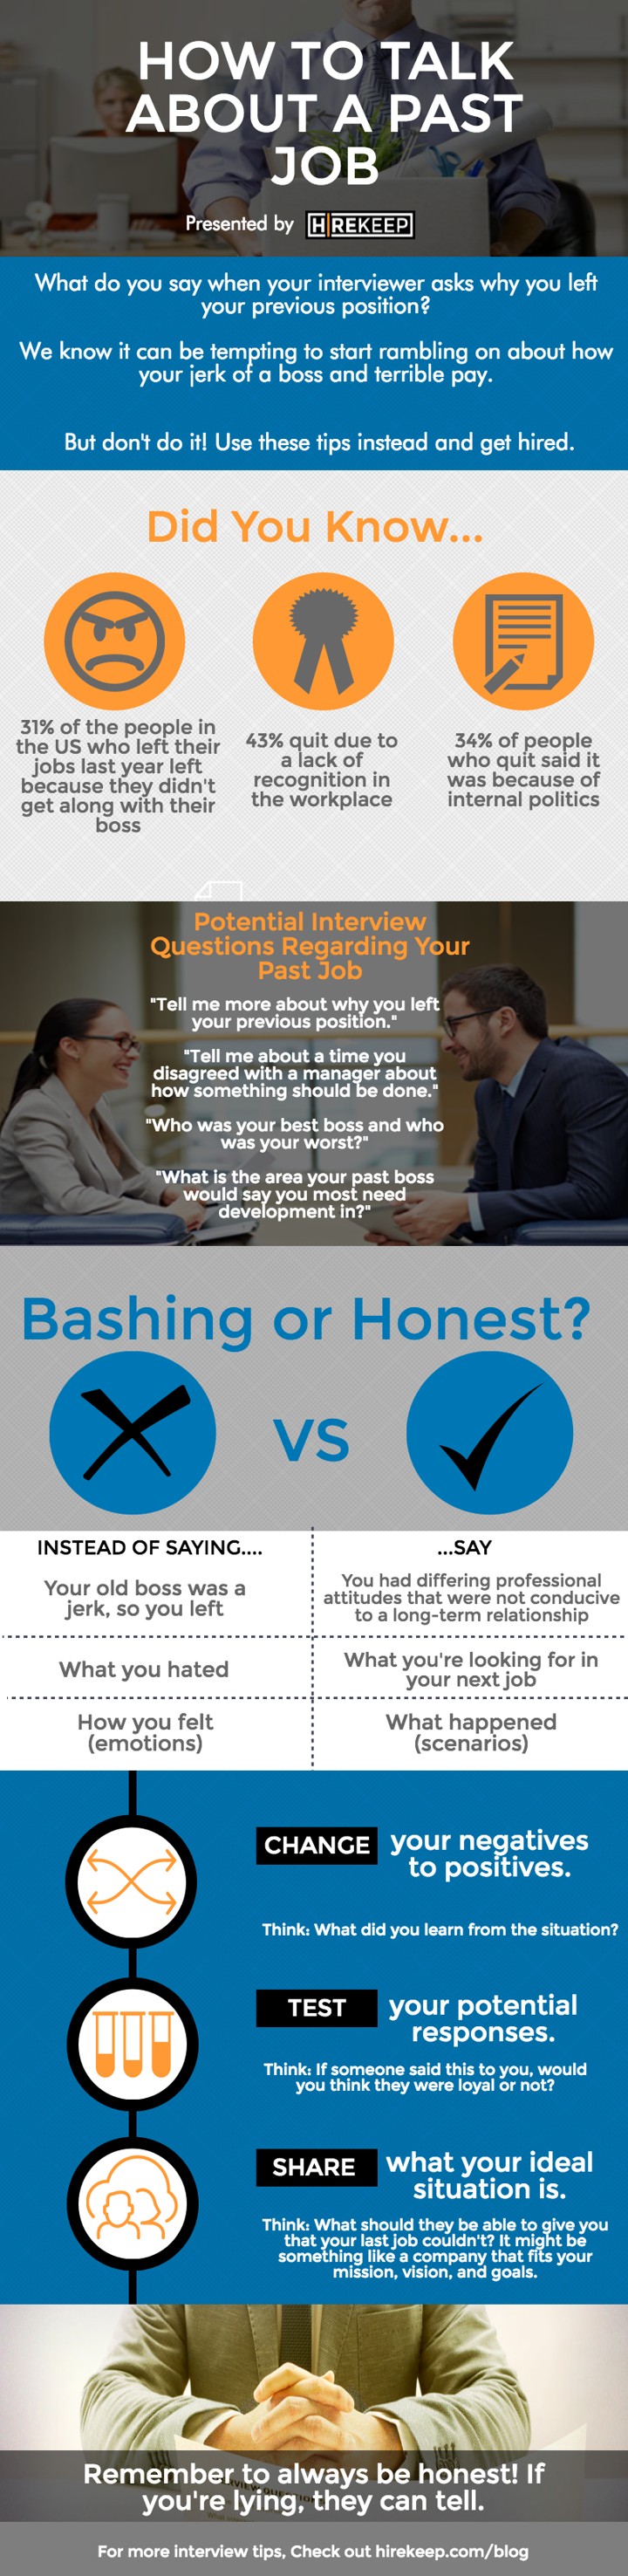 Interview questions infographic